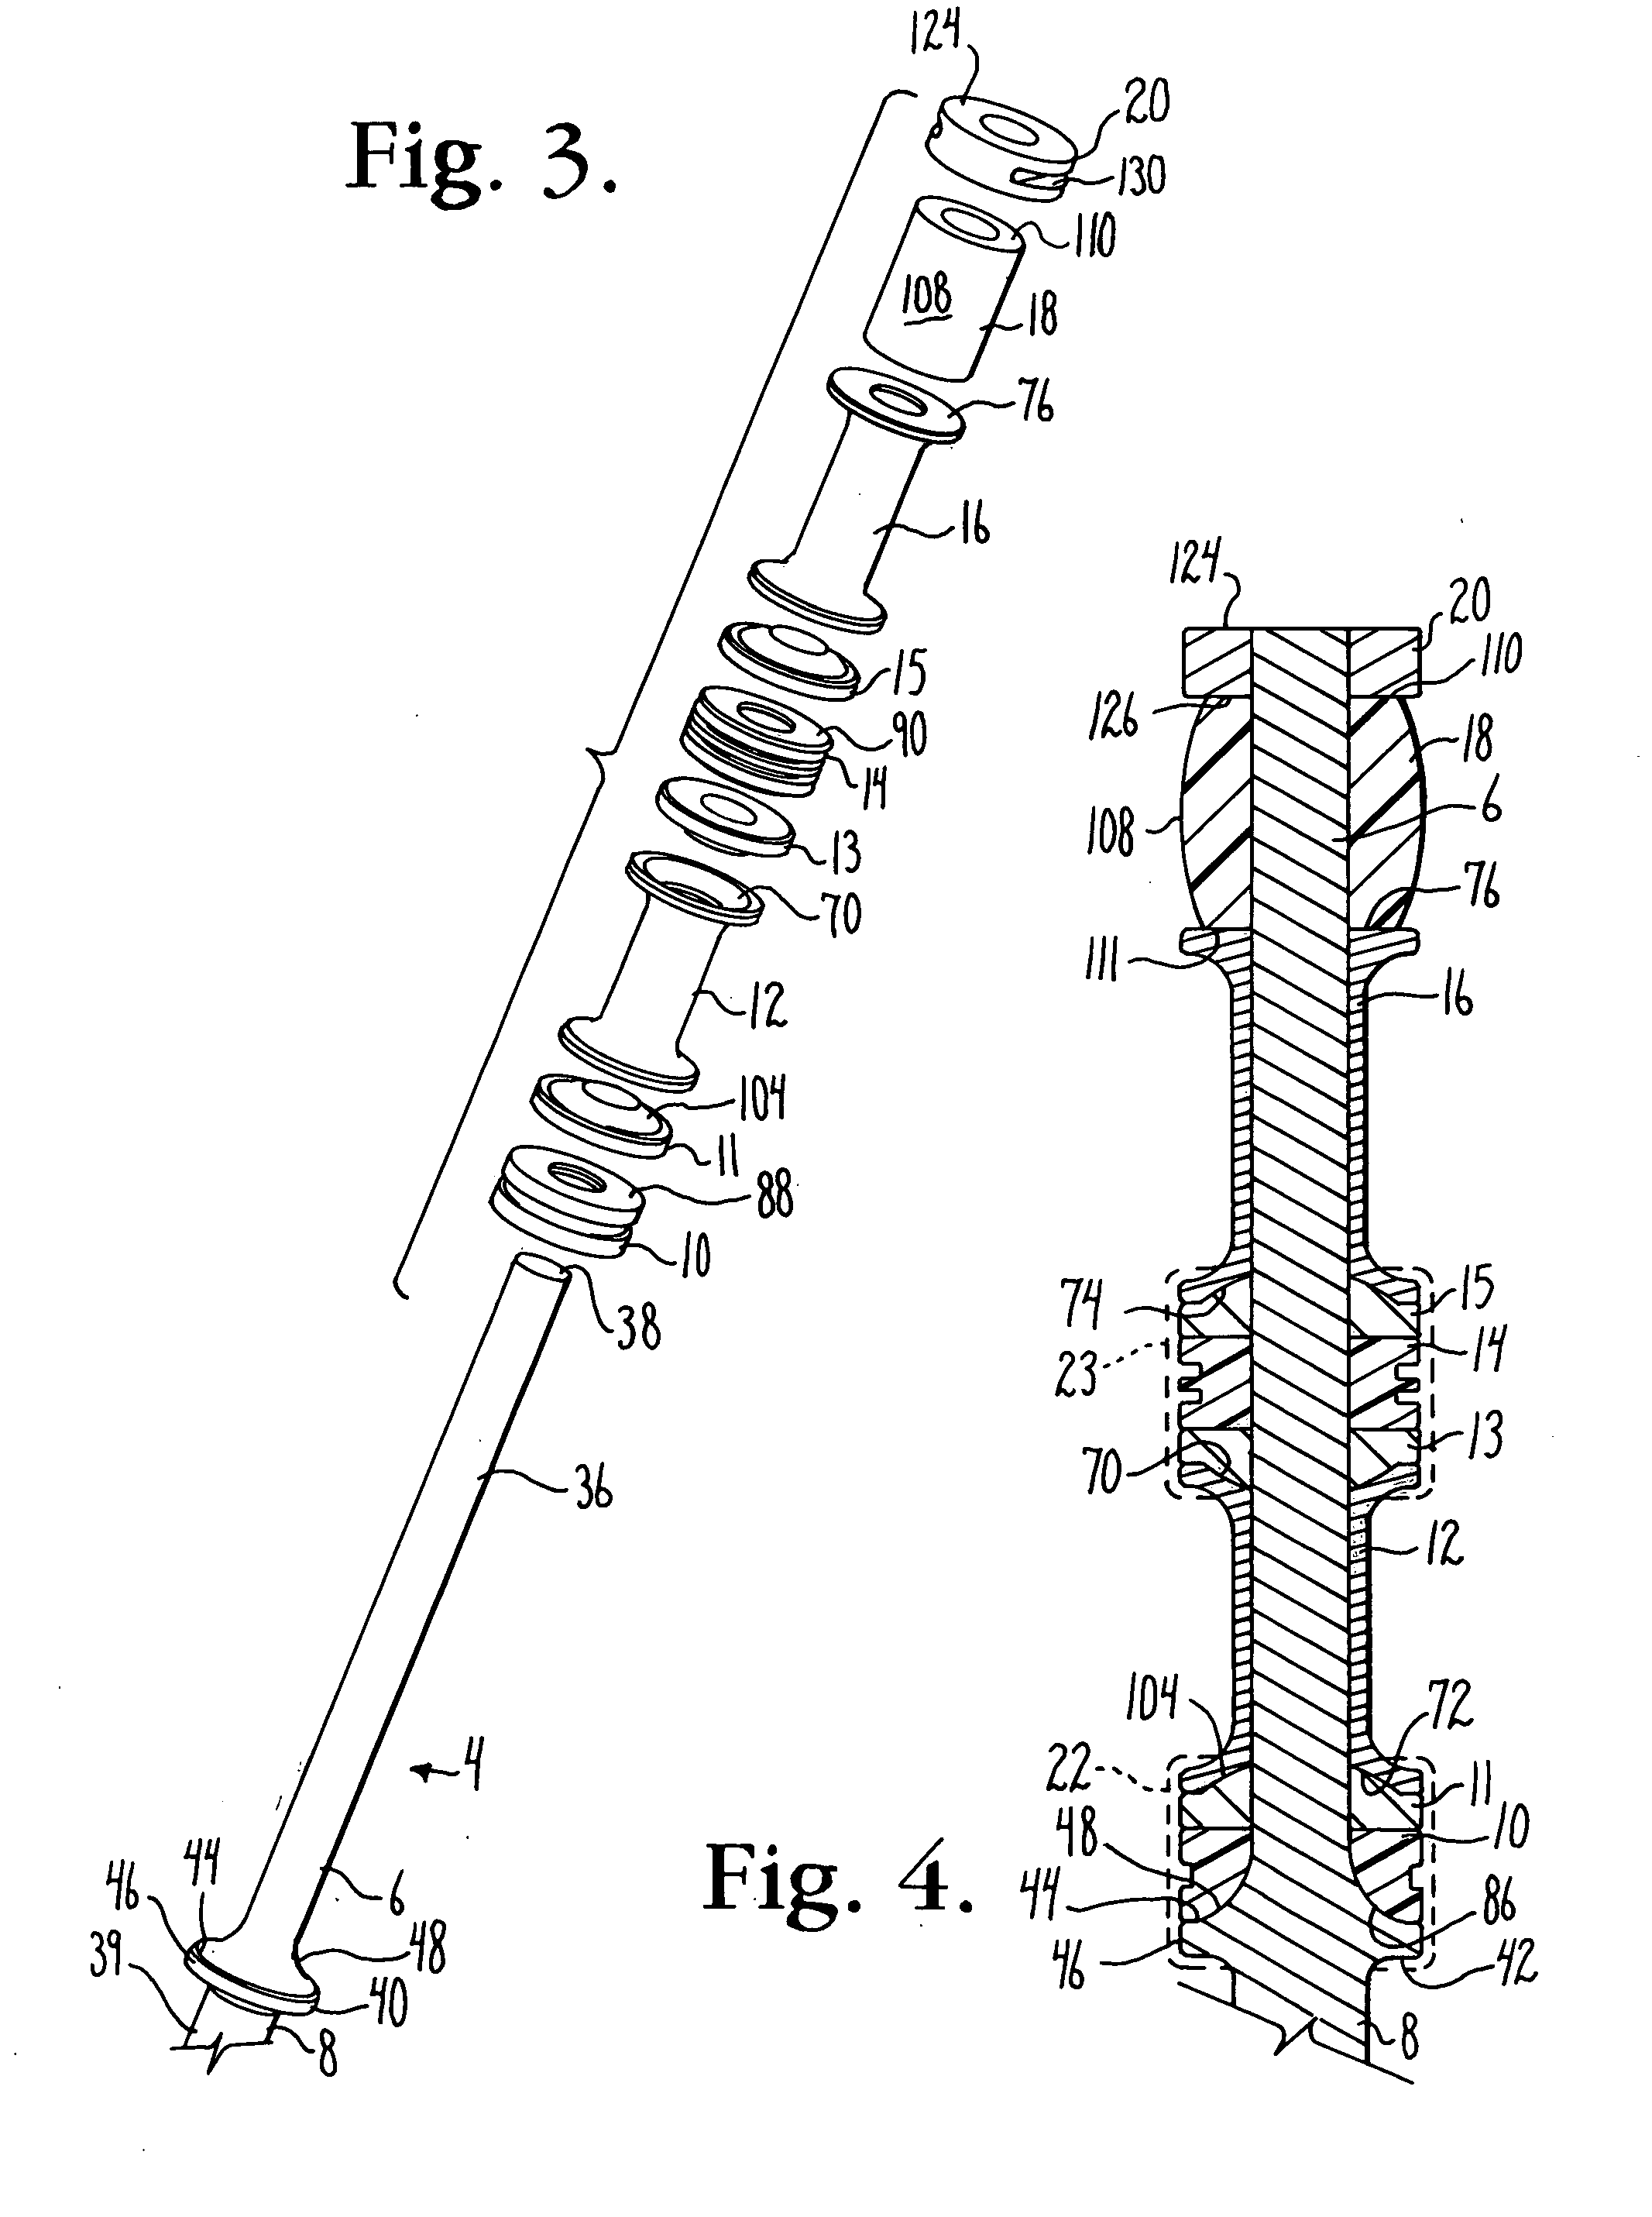 Dynamic stabilization assembly having pre-compressed spacers with differential displacements